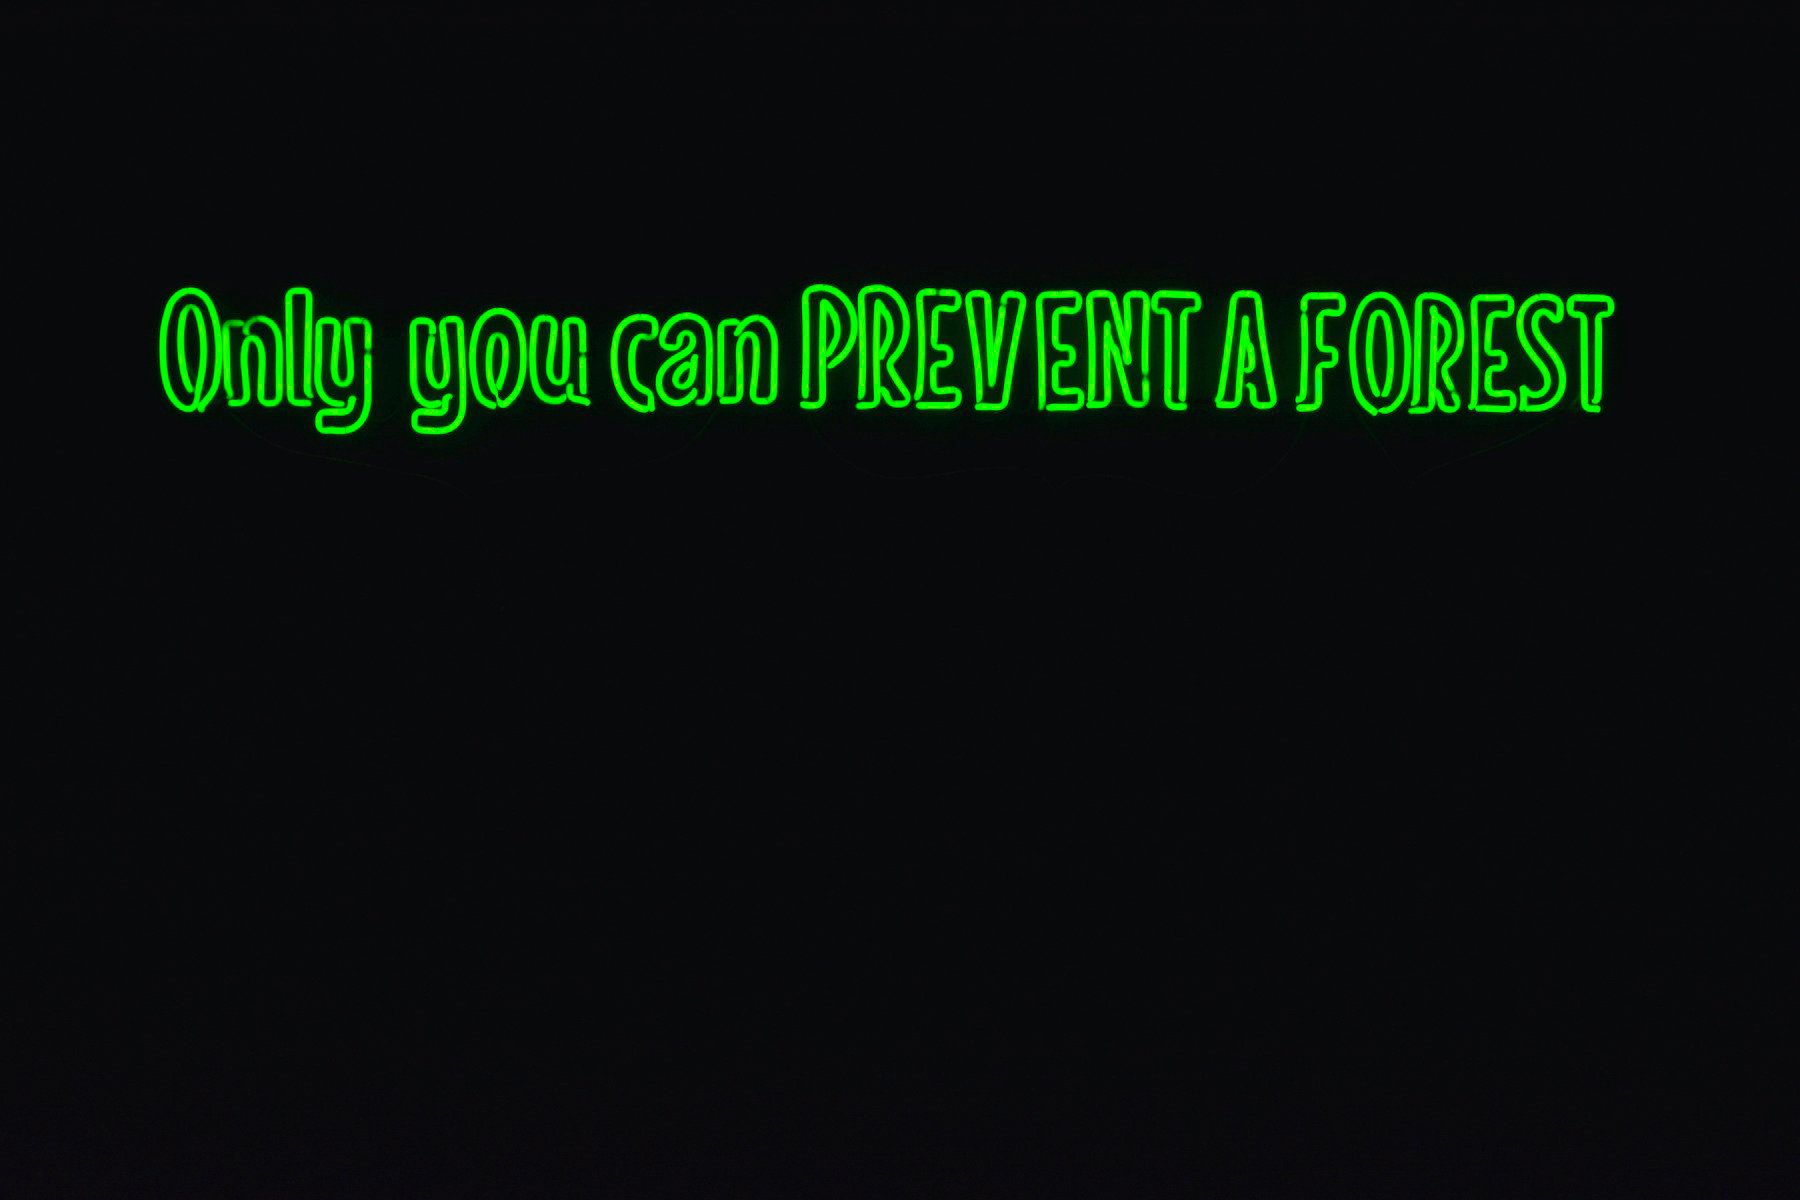 A black background with green text that reads “Only you can PREVENT A FOREST”, a twist on the slogan of Smokey Bear, a mascot for forest fire prevention. The text is in all caps and is in a neon green color, creating a contrast with the dark background.